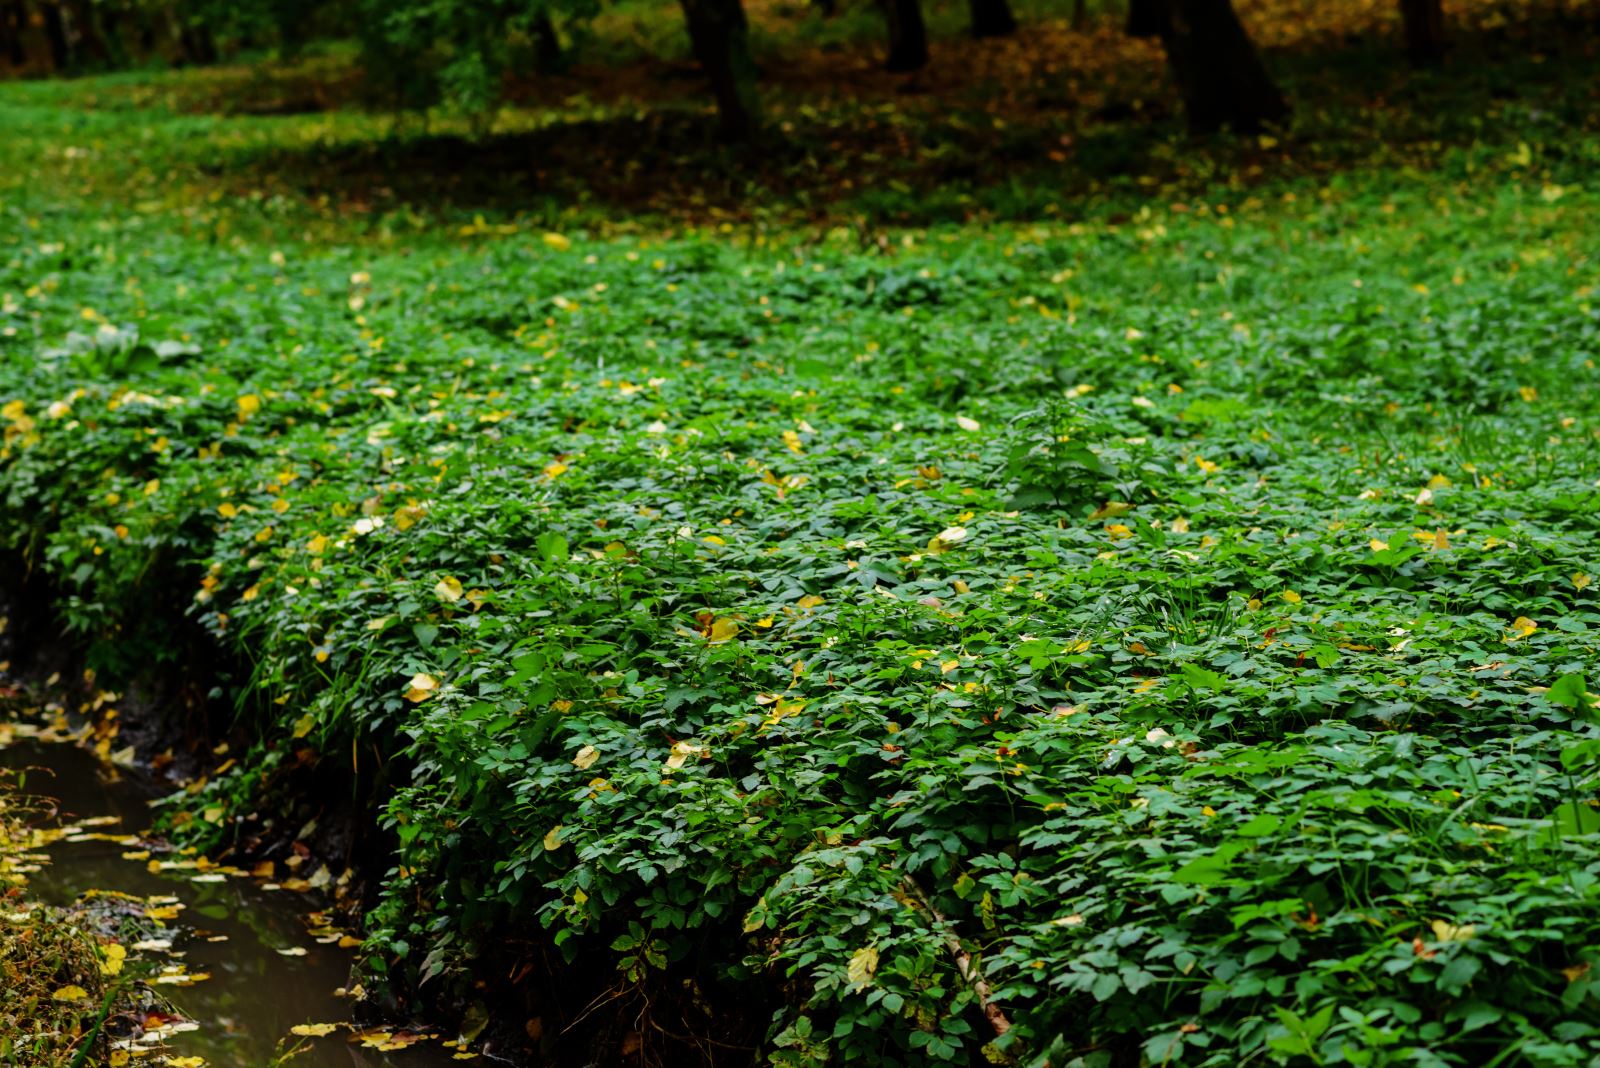 Mint used as groundcover. Photo by cezarfix 123RF Stock Photo